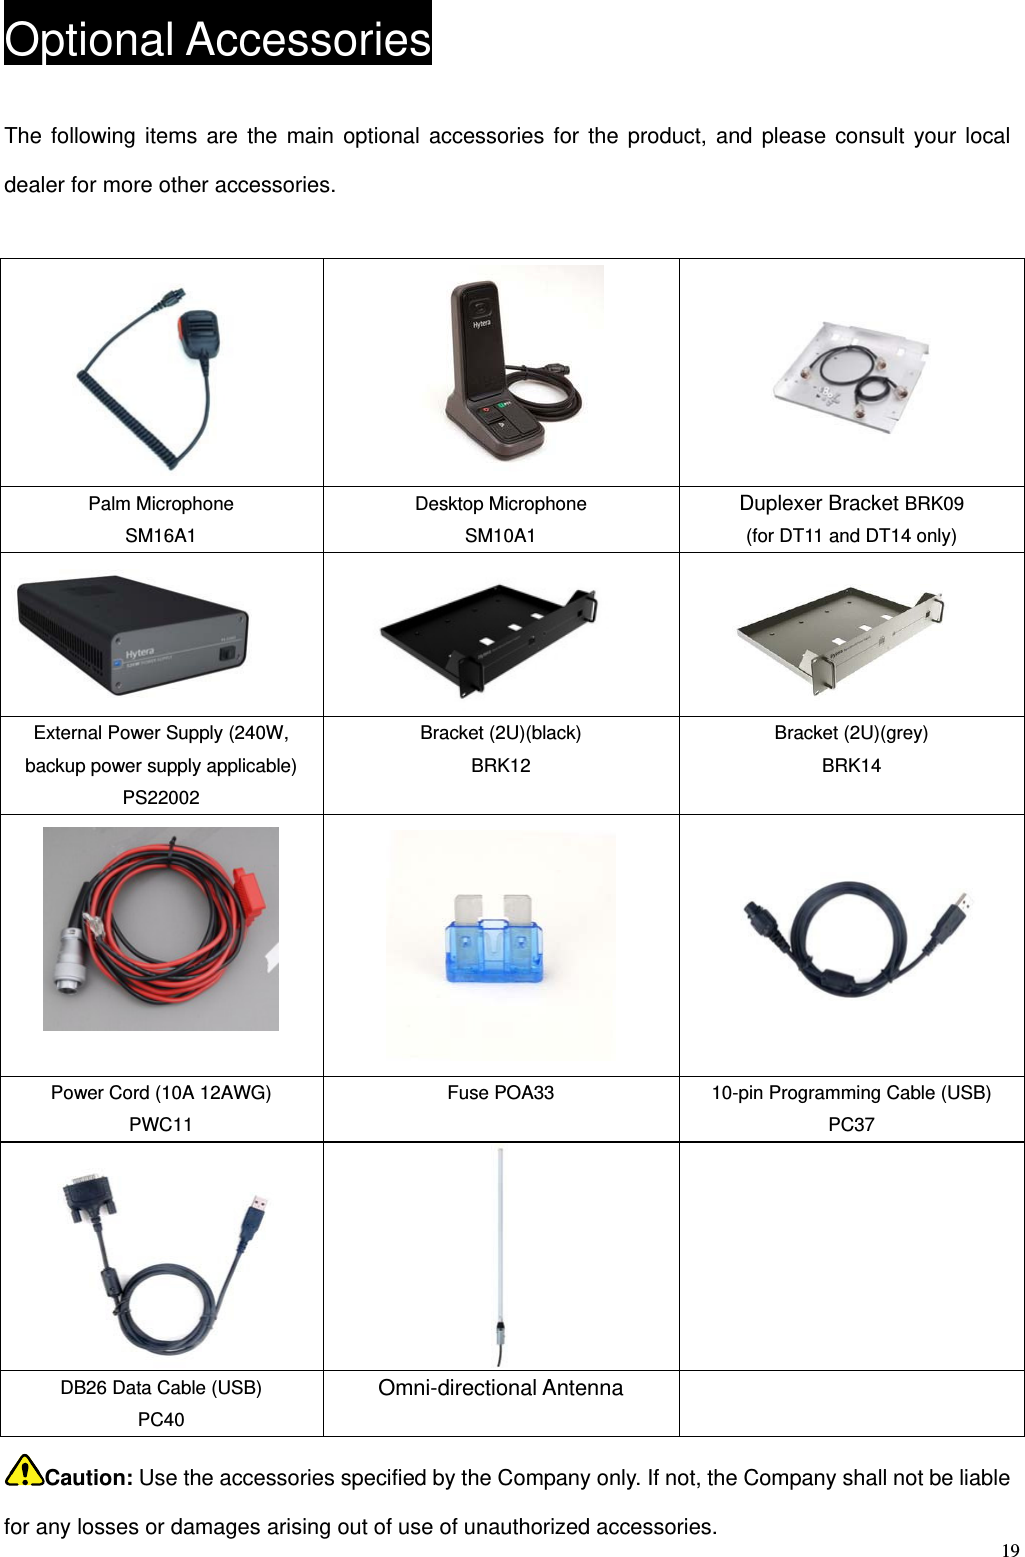   19Optional Accessories The following items are the main optional accessories for the product, and please consult your local dealer for more other accessories.       Palm Microphone SM16A1 Desktop Microphone SM10A1 Duplexer Bracket BRK09 (for DT11 and DT14 only)   External Power Supply (240W, backup power supply applicable) PS22002 Bracket (2U)(black) BRK12 Bracket (2U)(grey) BRK14    Power Cord (10A 12AWG) PWC11 Fuse POA33  10-pin Programming Cable (USB) PC37   DB26 Data Cable (USB) PC40 Omni-directional Antenna   Caution: Use the accessories specified by the Company only. If not, the Company shall not be liable for any losses or damages arising out of use of unauthorized accessories.   